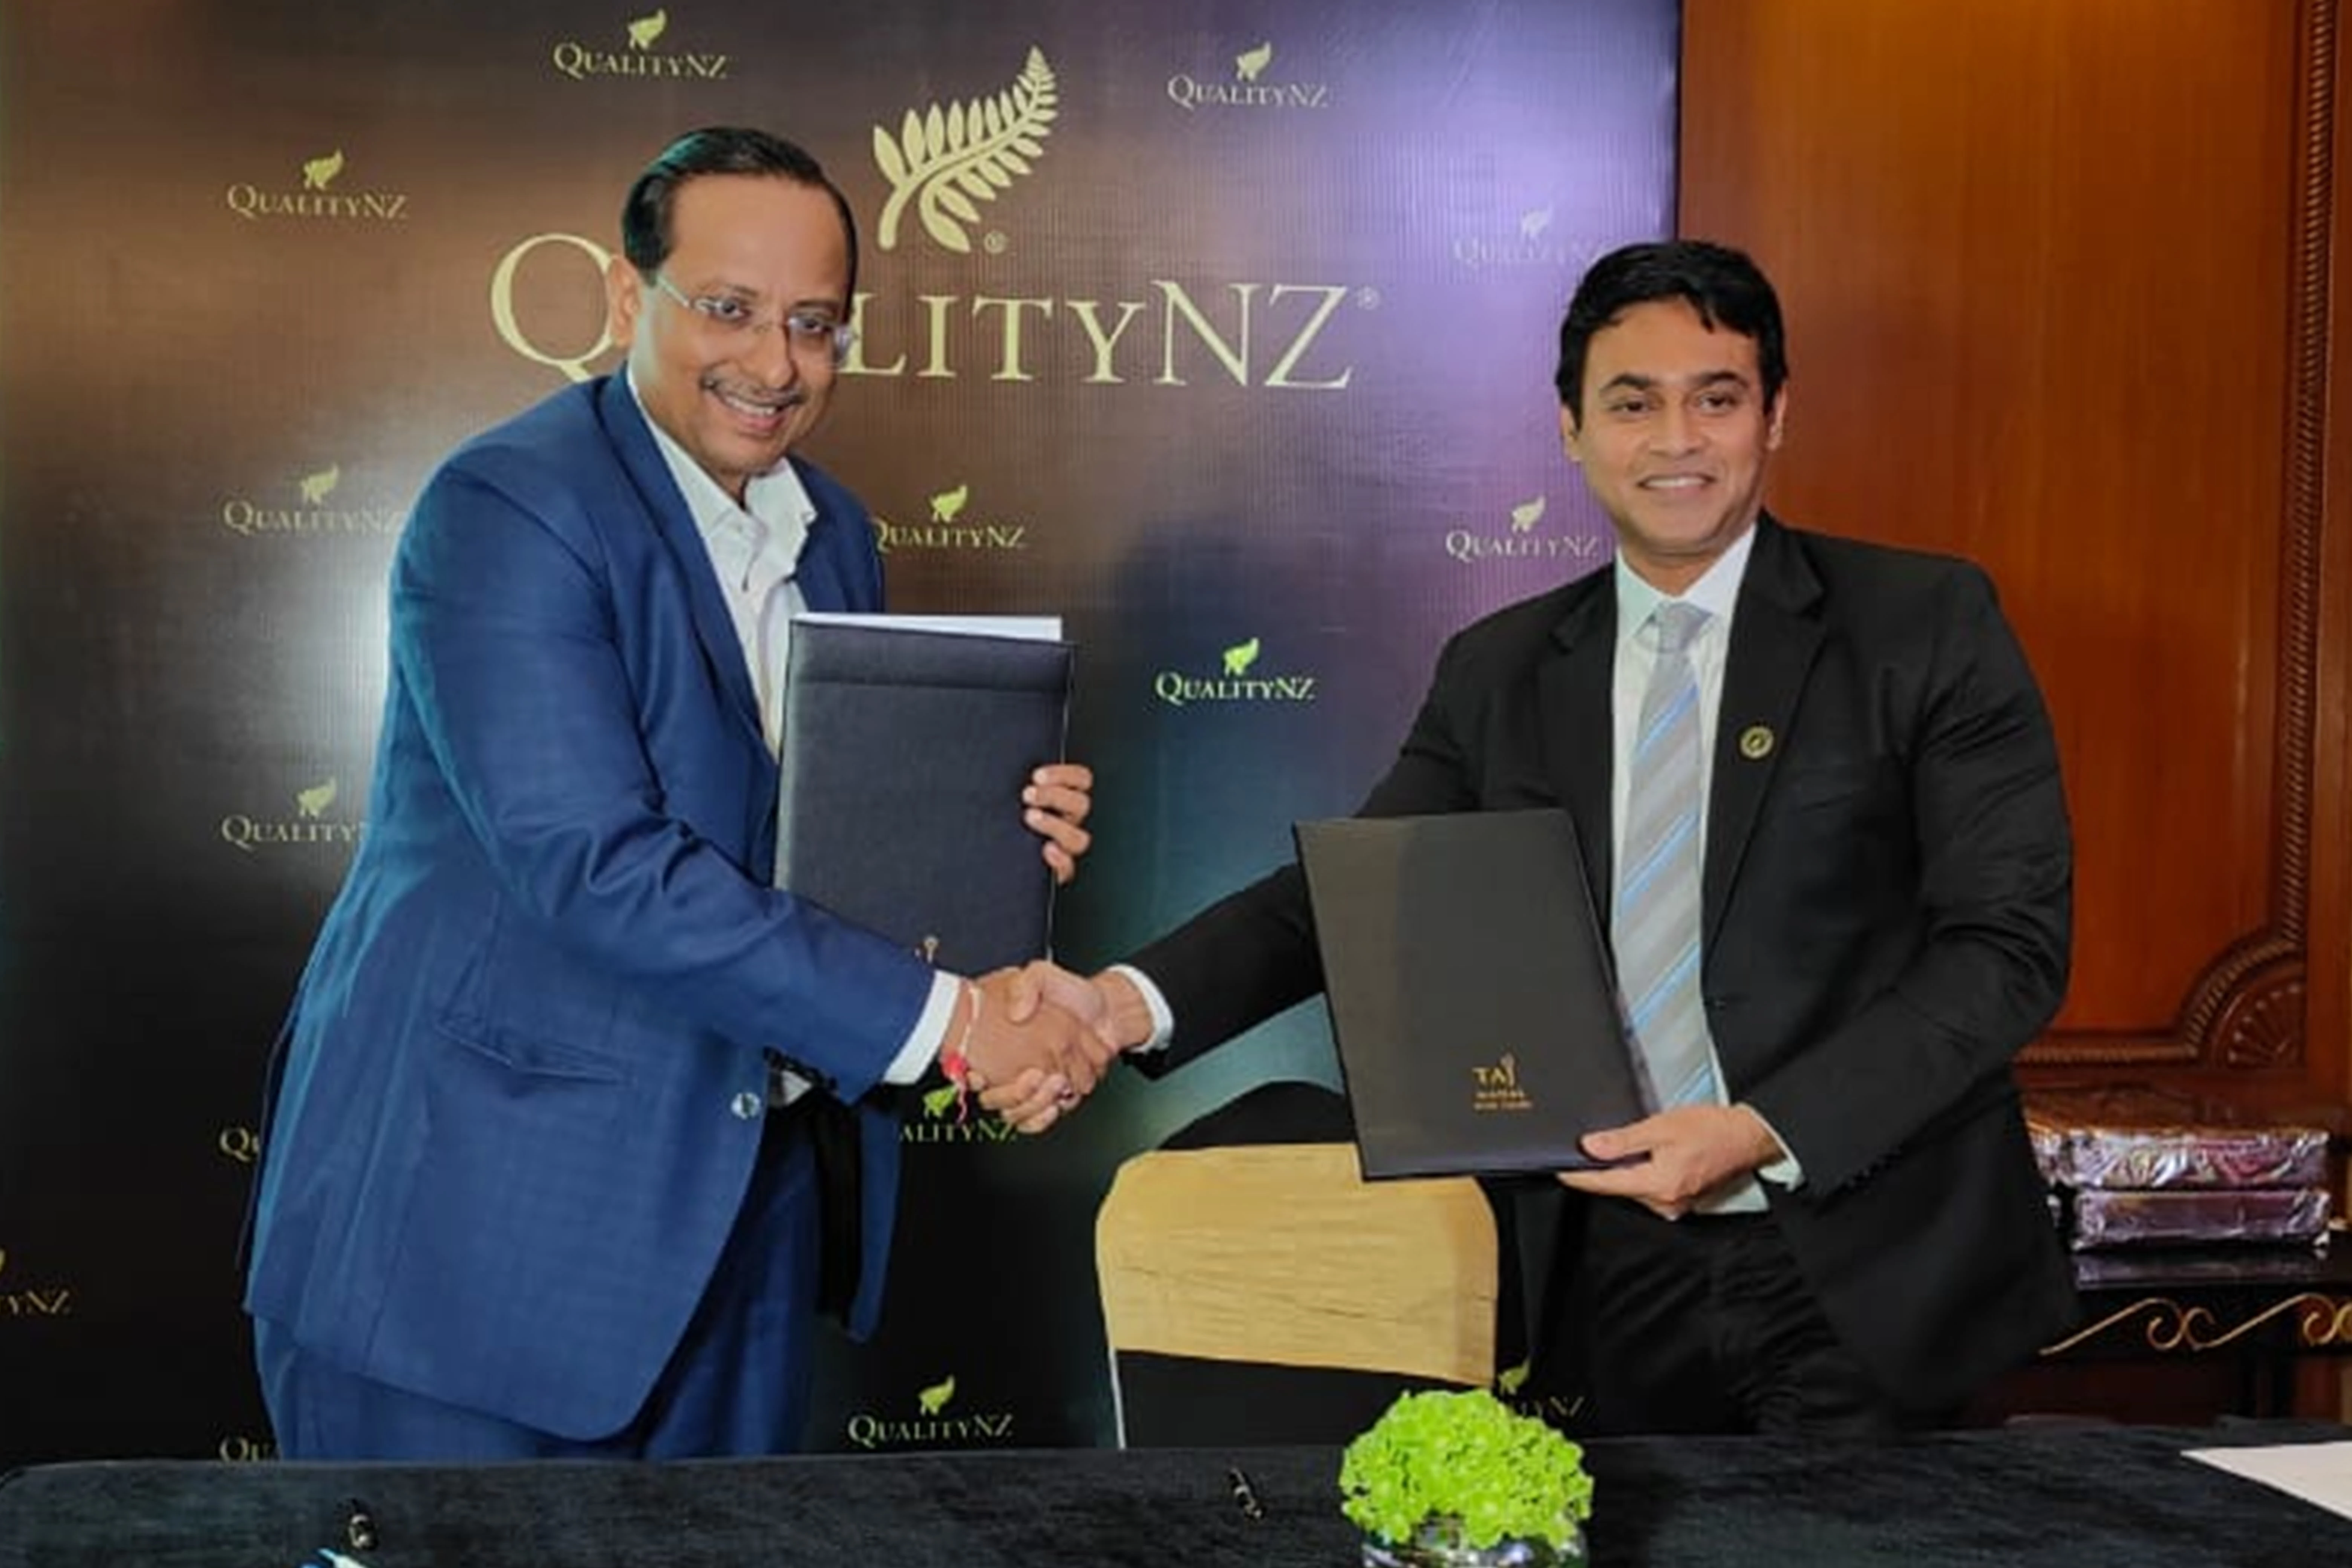 MOU signing with QualityNZ